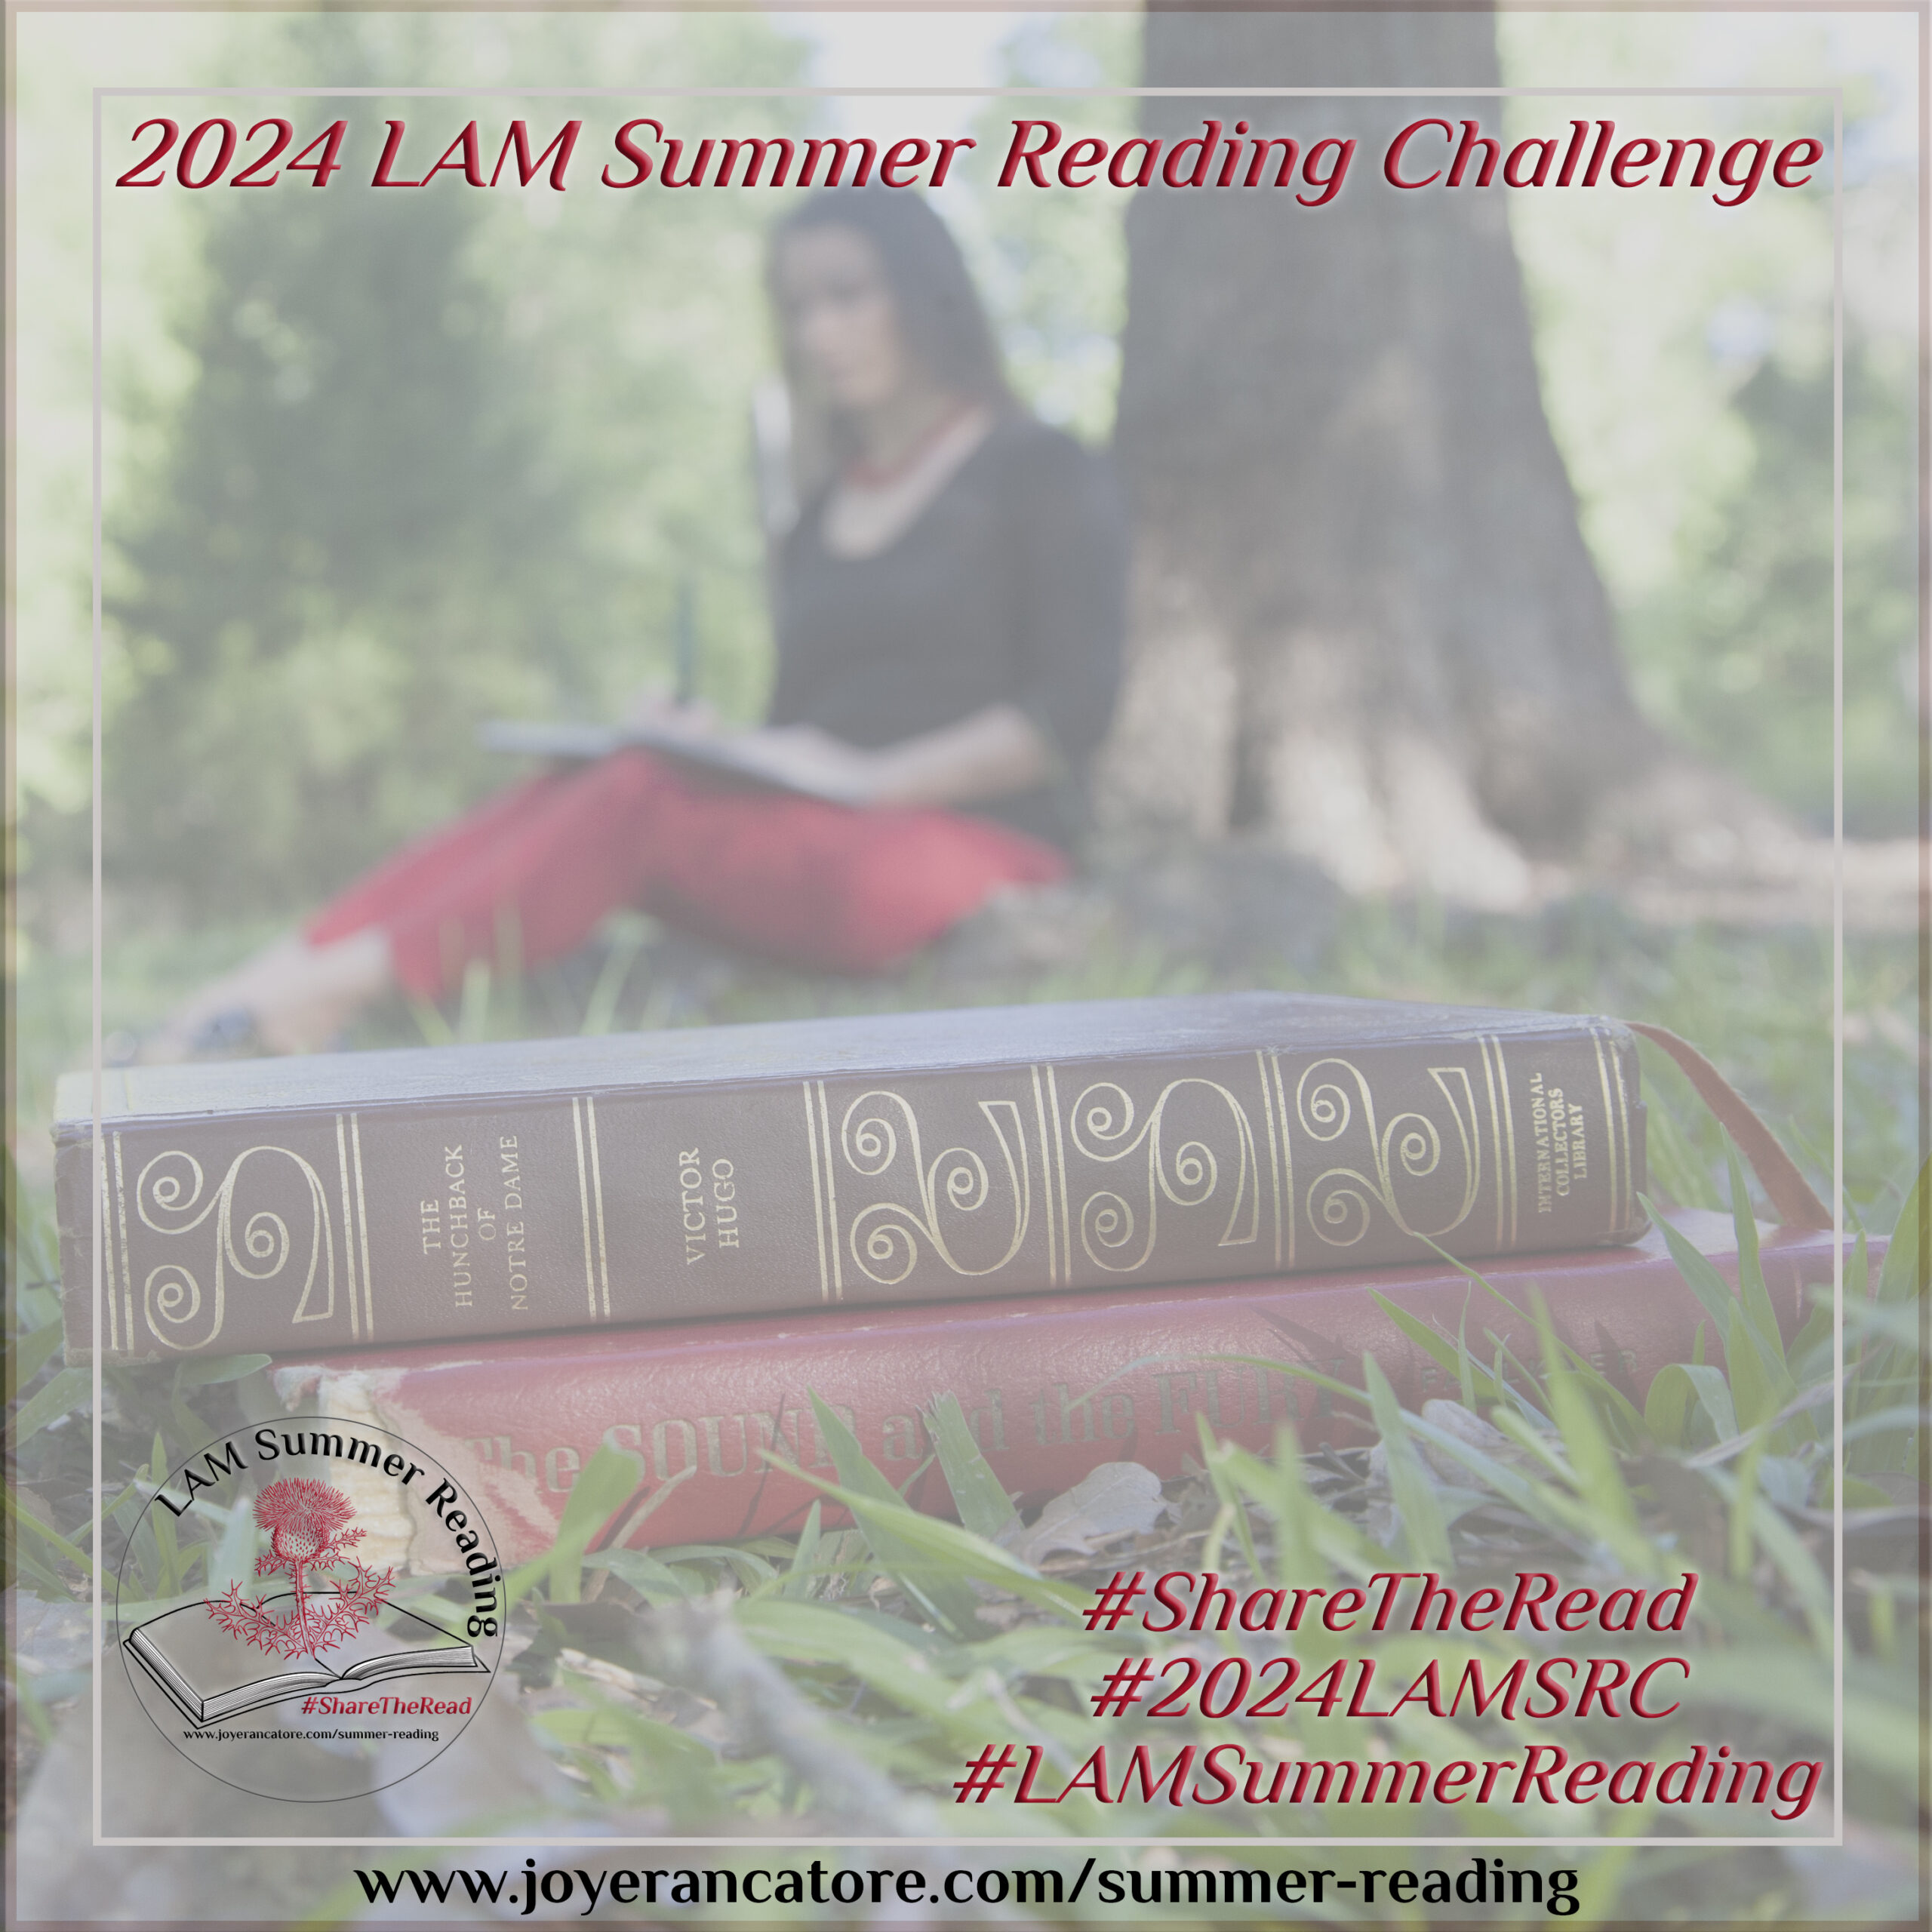 Graphic to advertise the 2024 LAM Summer Reading Challenge and link to the hub page: joyerancatore.com/summer-reading #ShareTheRead